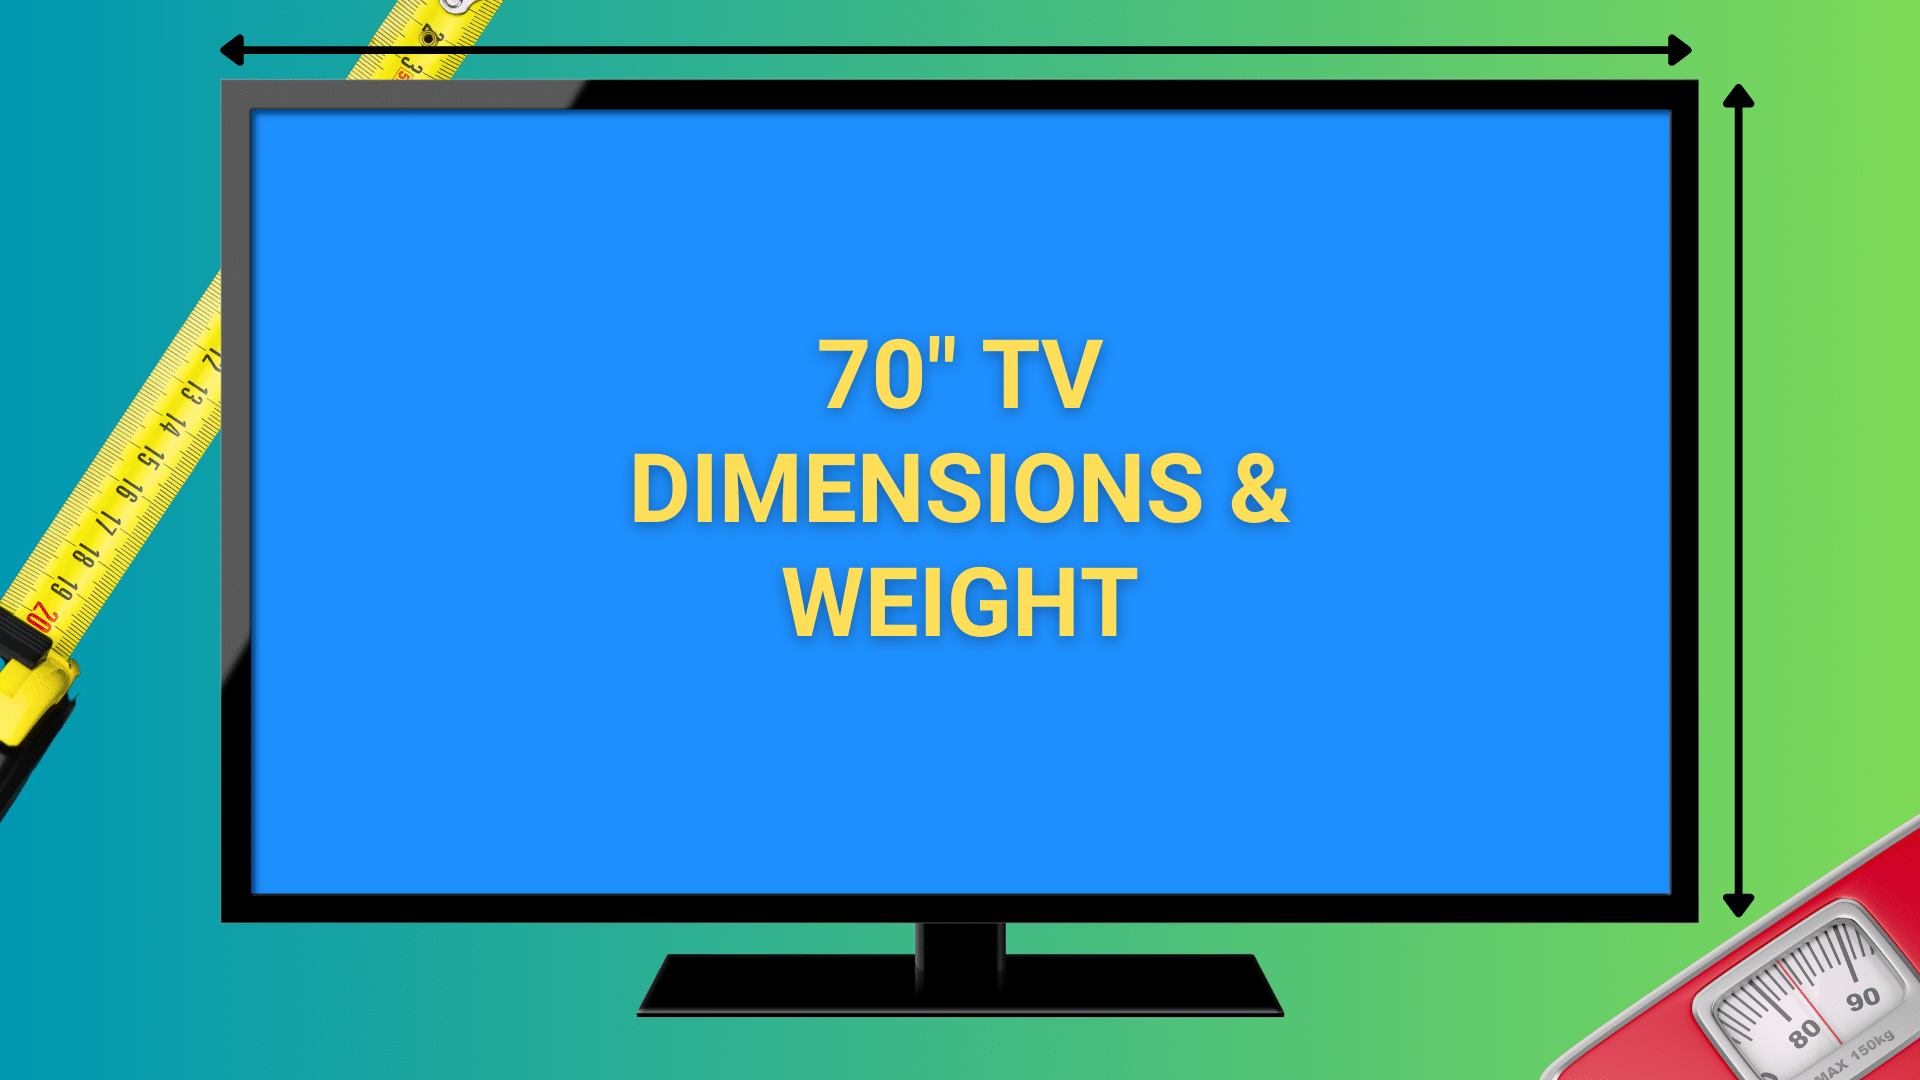 Image of 70 inch TV with measuring tape and bath scale in background.